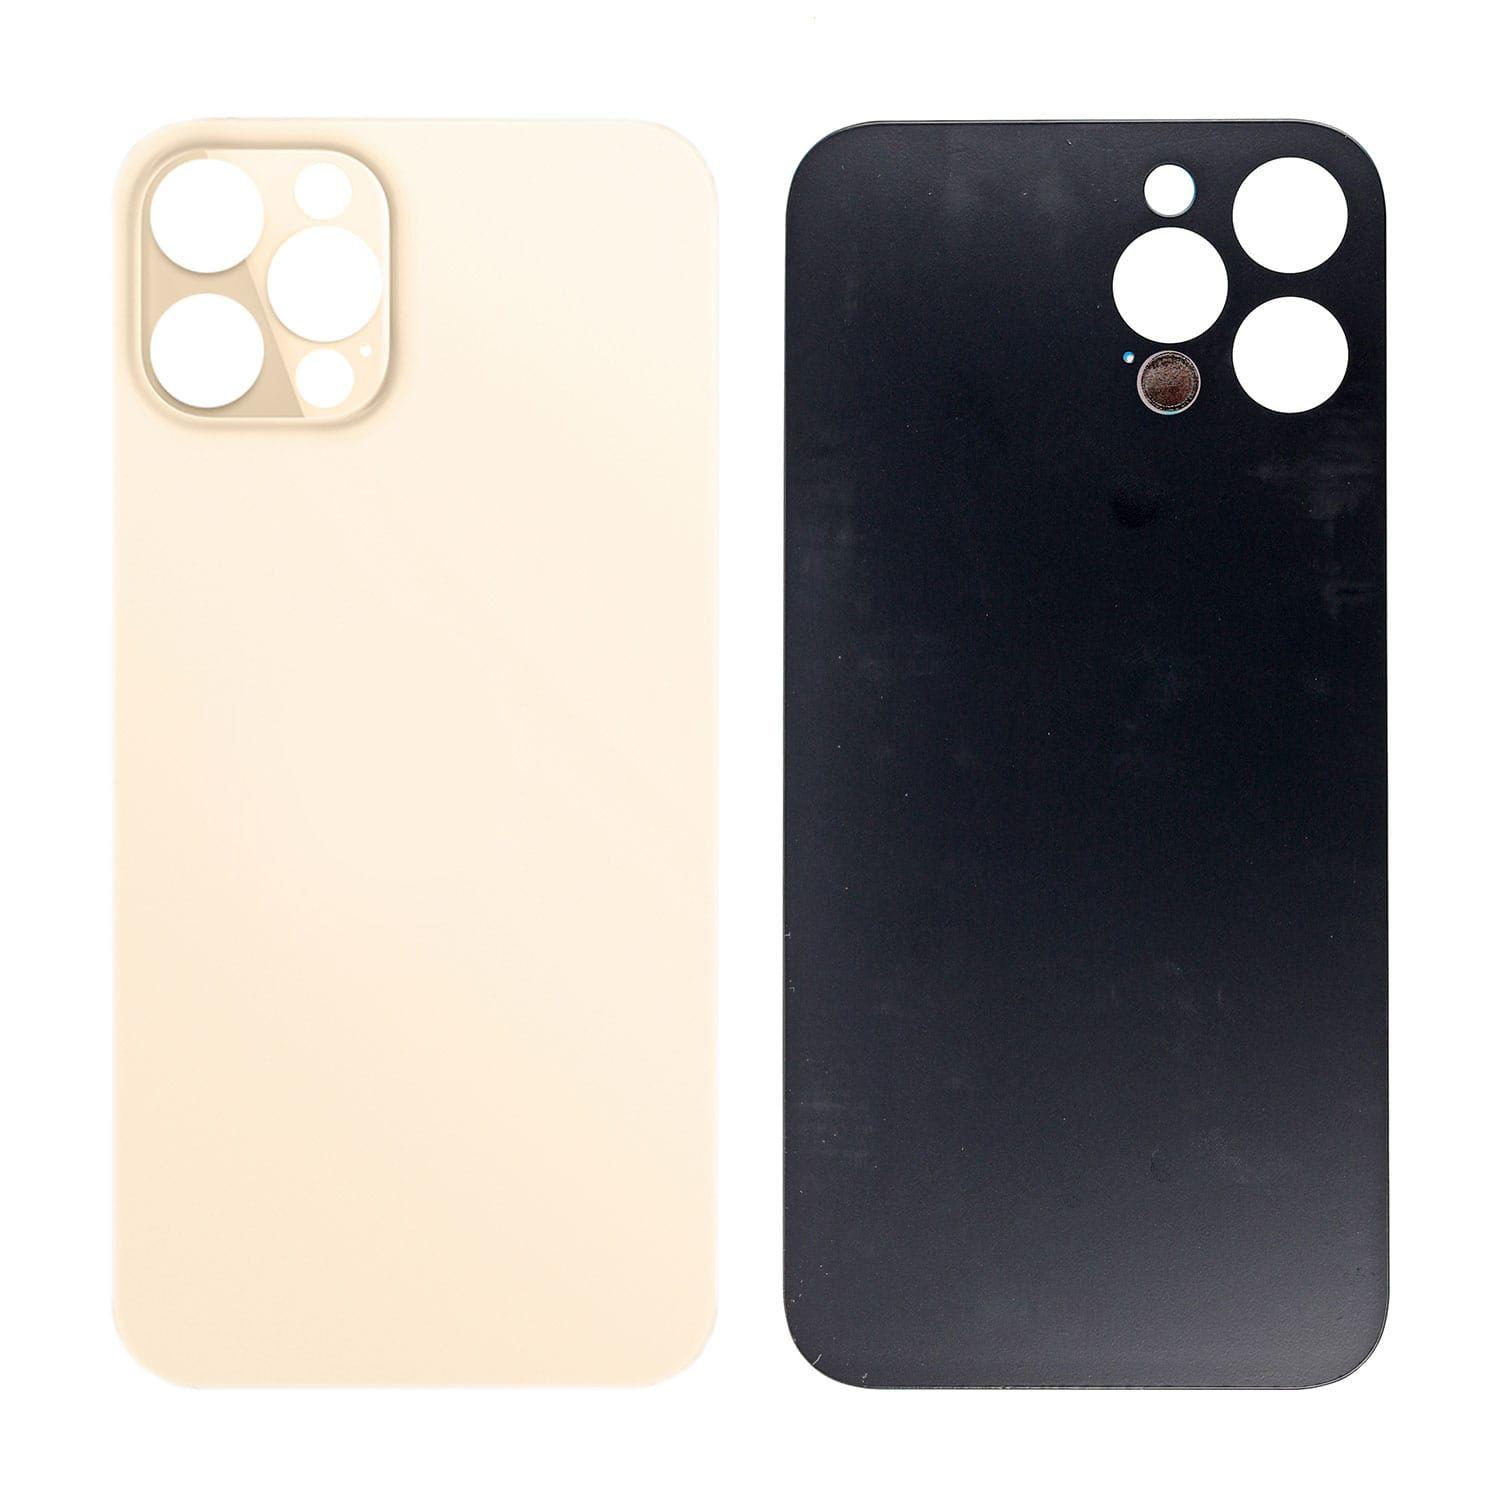 Battery cover iPhone 12 Pro with bigger hole for camera glass - gold